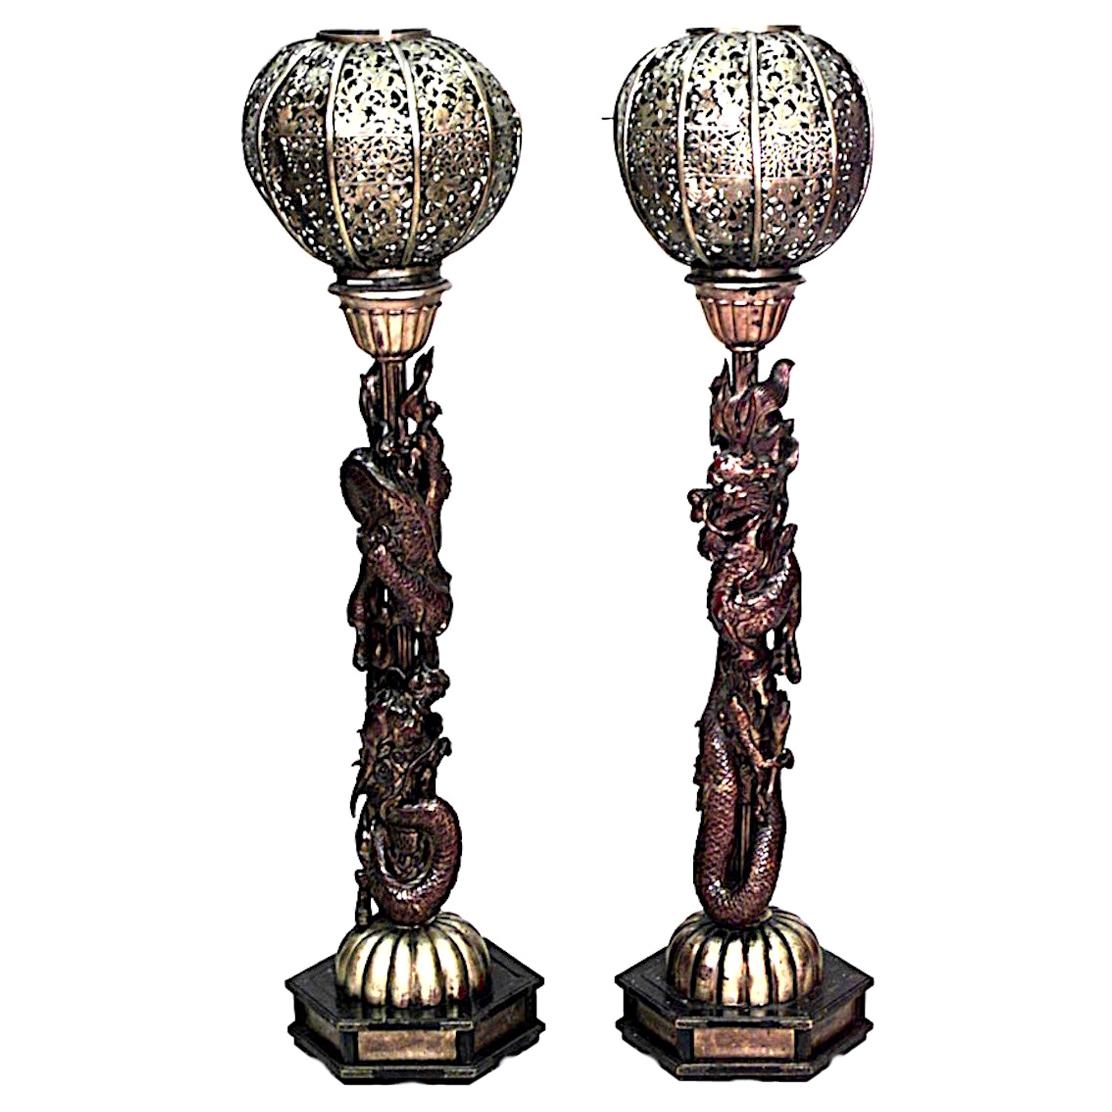 Pair of Chinese Style Filigree Gilt Wood Dragon Floor Lamps